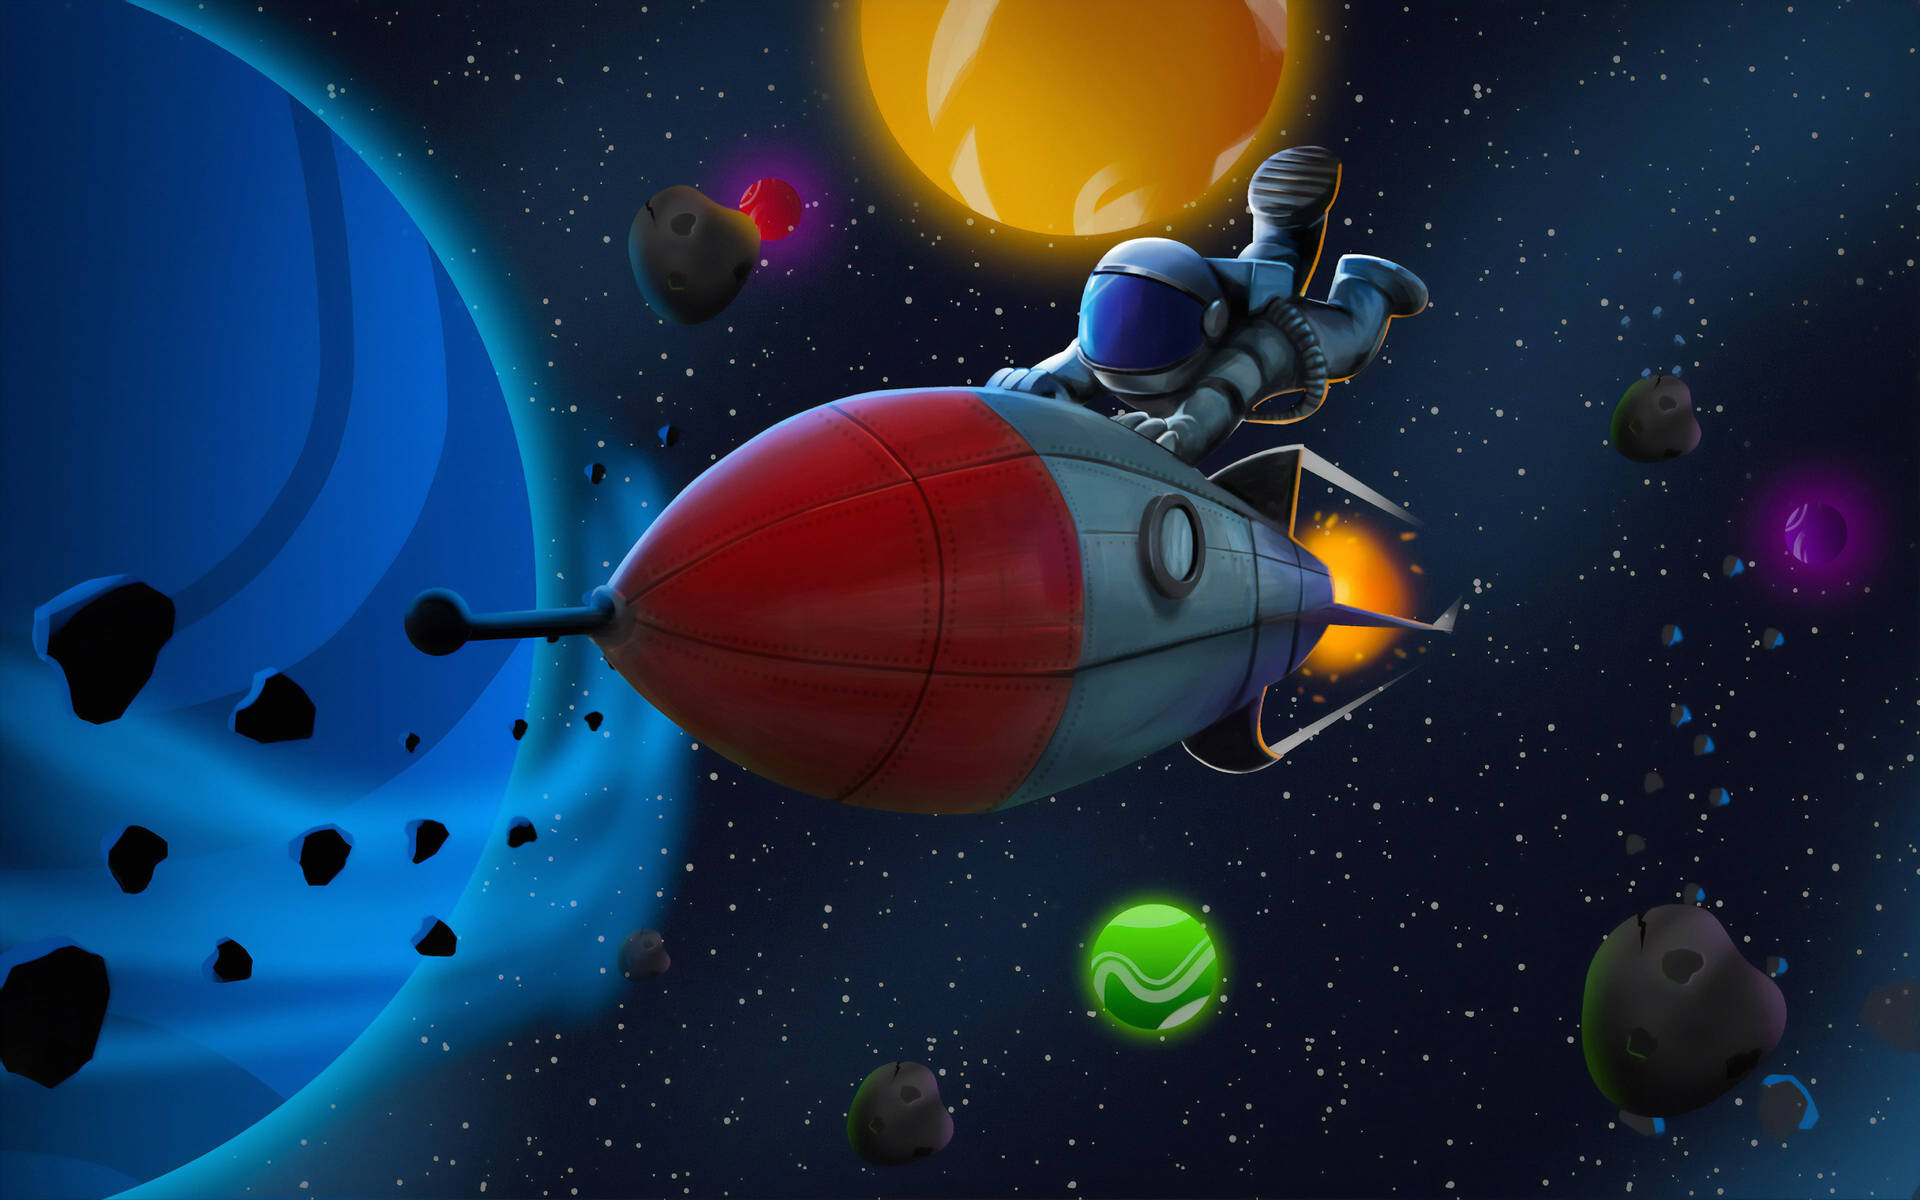 Rocket In Space With Astronaut Background